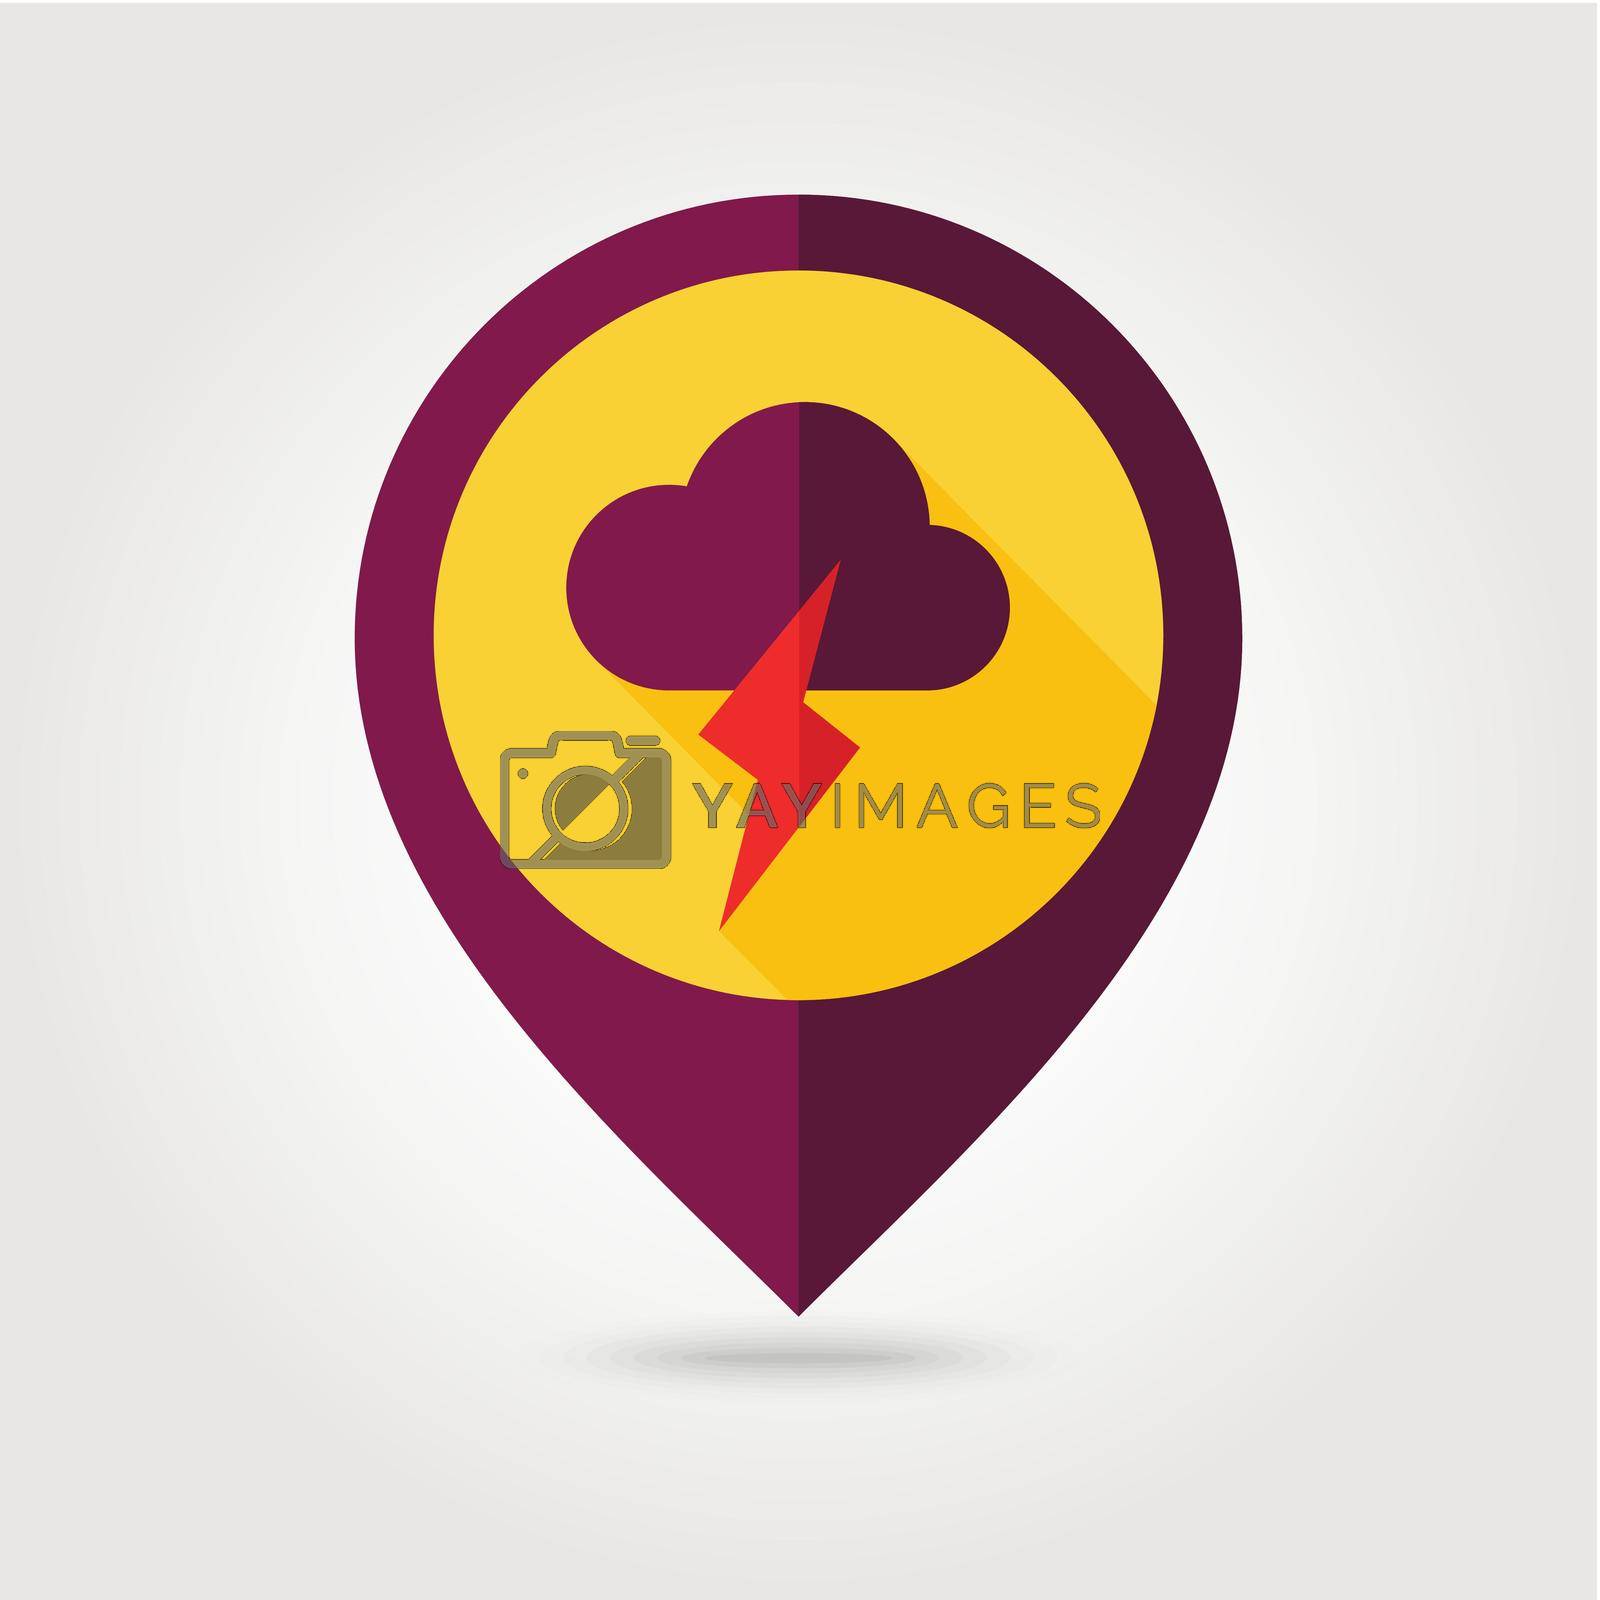 Cloud Lightning flat pin map icon. Map pointer. Map markers. Meteorology. Weather. Vector illustration eps 10